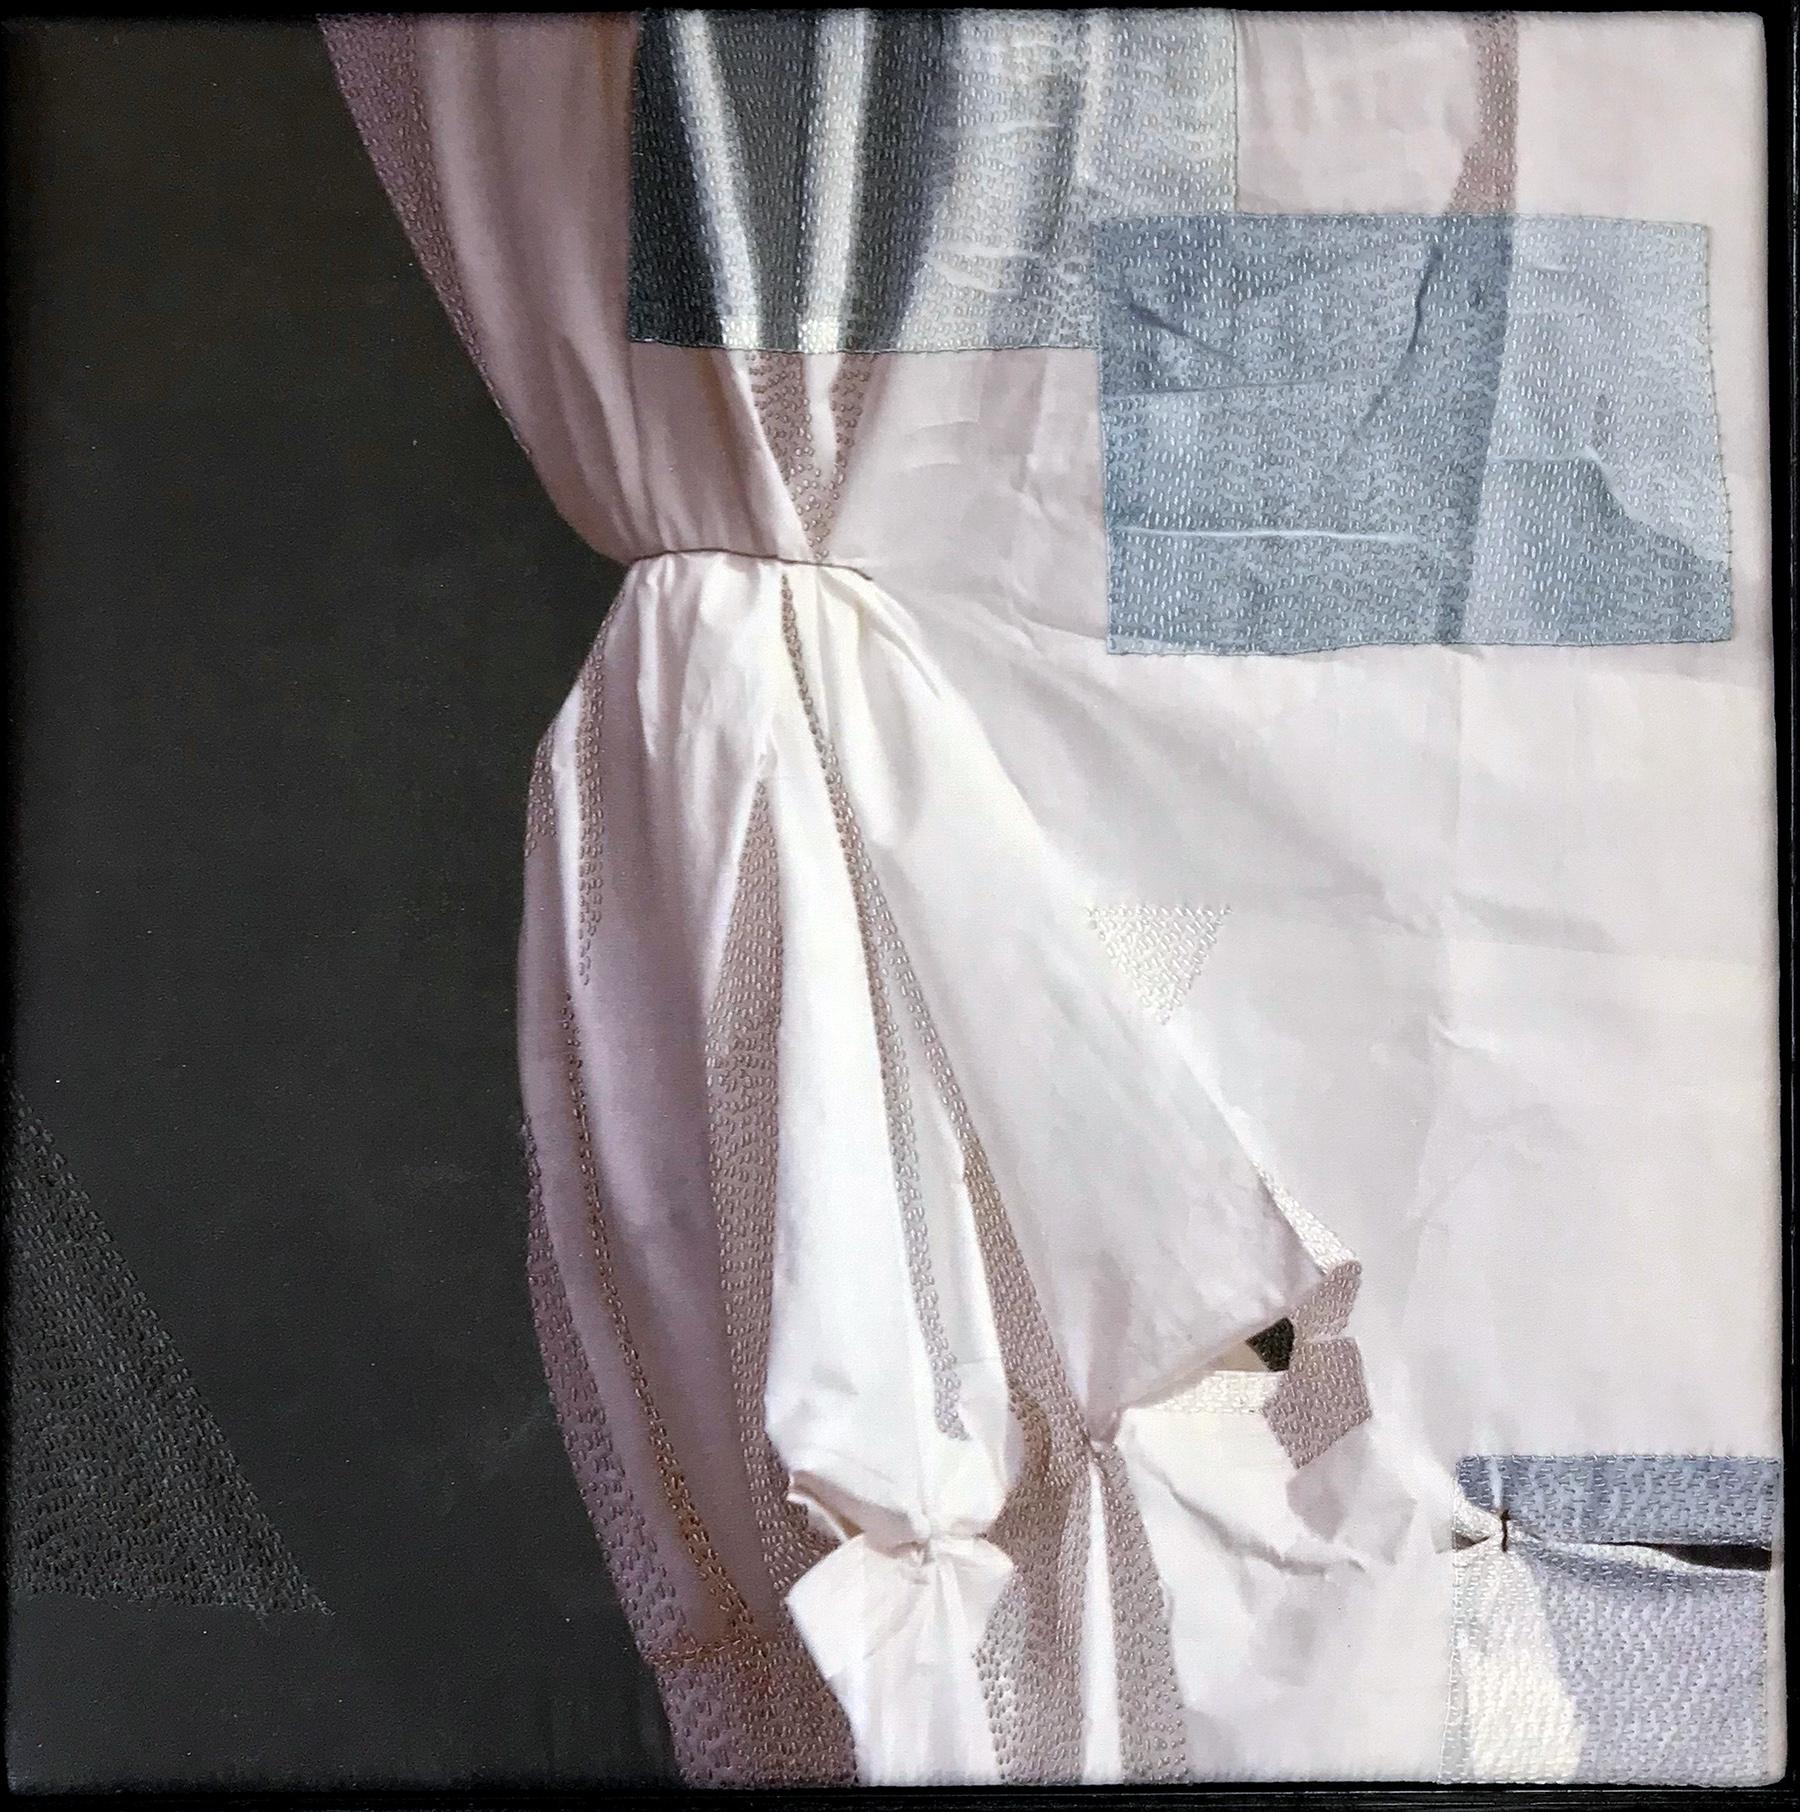 Luanne Rimel Abstract Sculpture - "Curtain Call / St. Louis", Original Photography, Printed on Silk, Hand Stitched